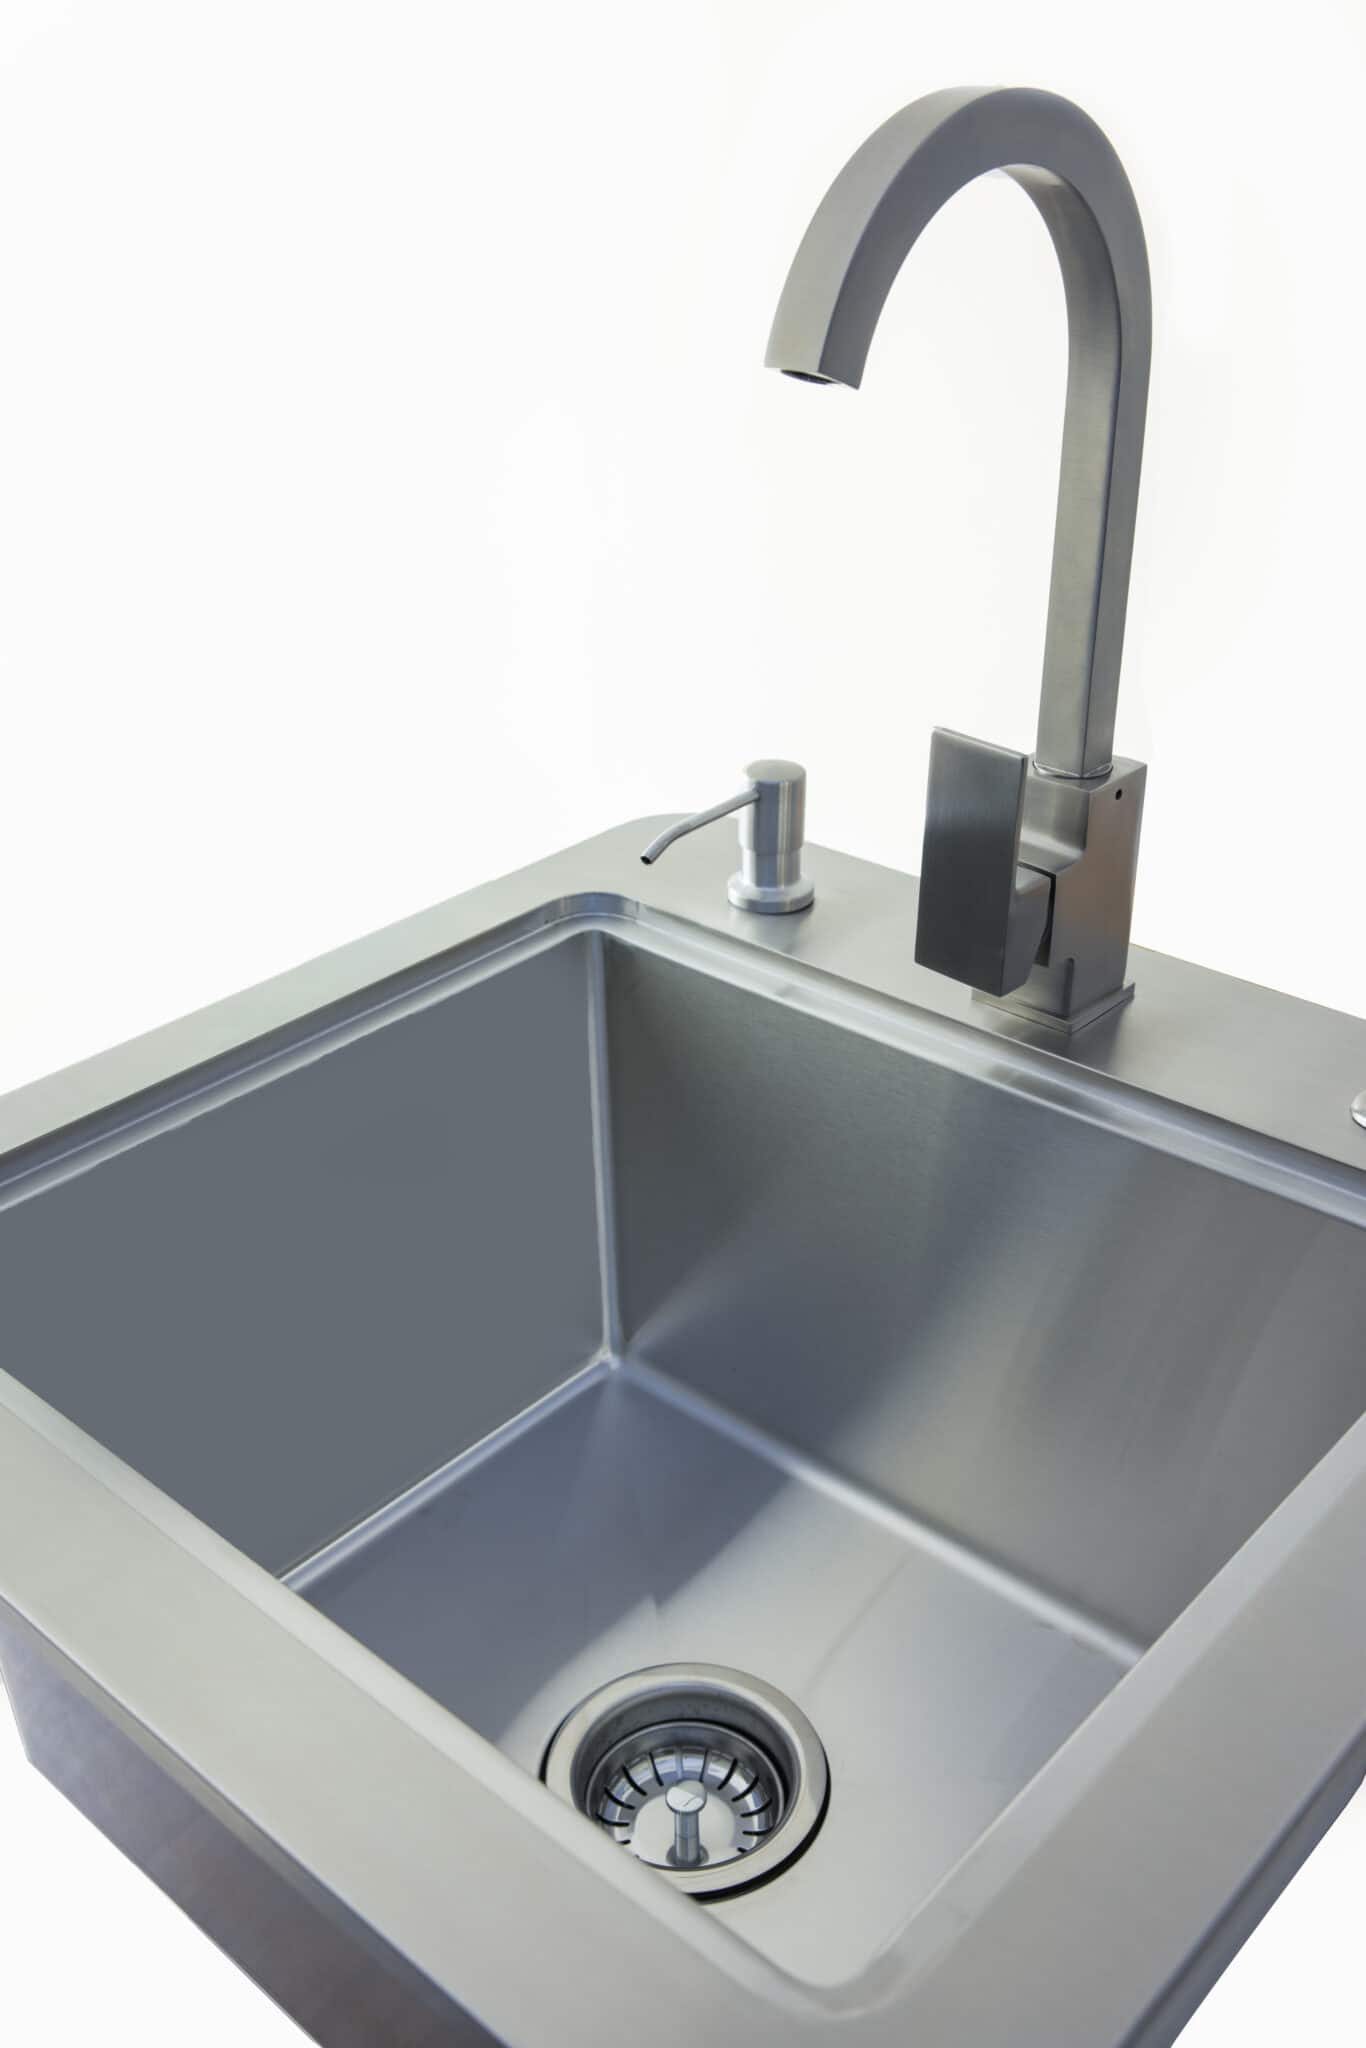 Coyote 21 Inch Sink With Faucet, Drain, Soap Dispenser